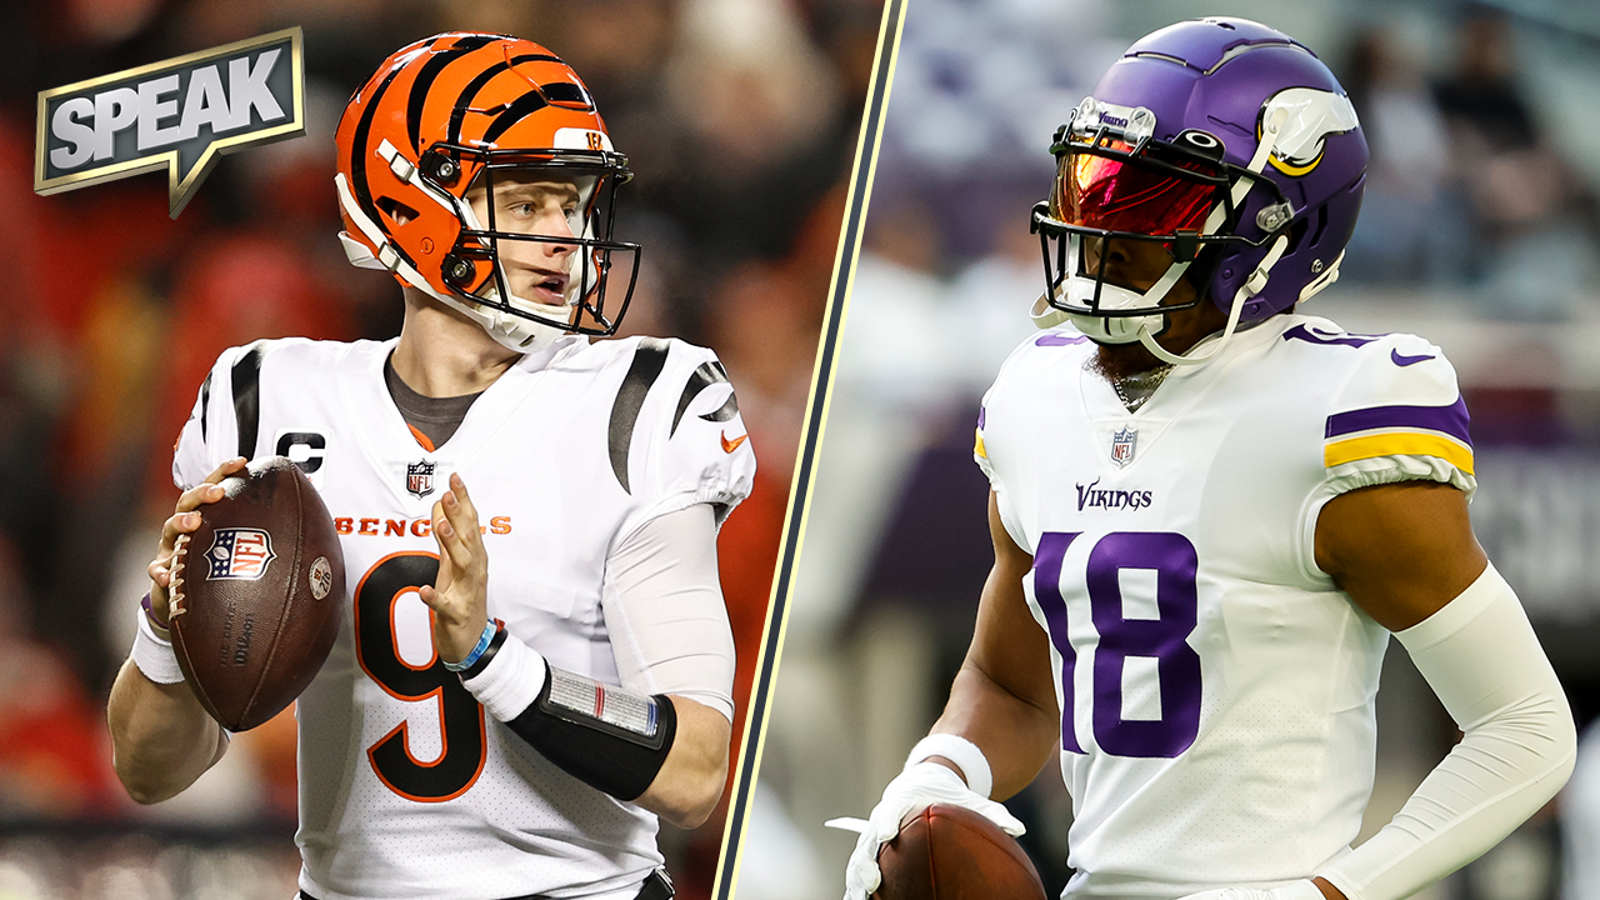 Who are the best QBWR duos ahead of the 2023 NFL season